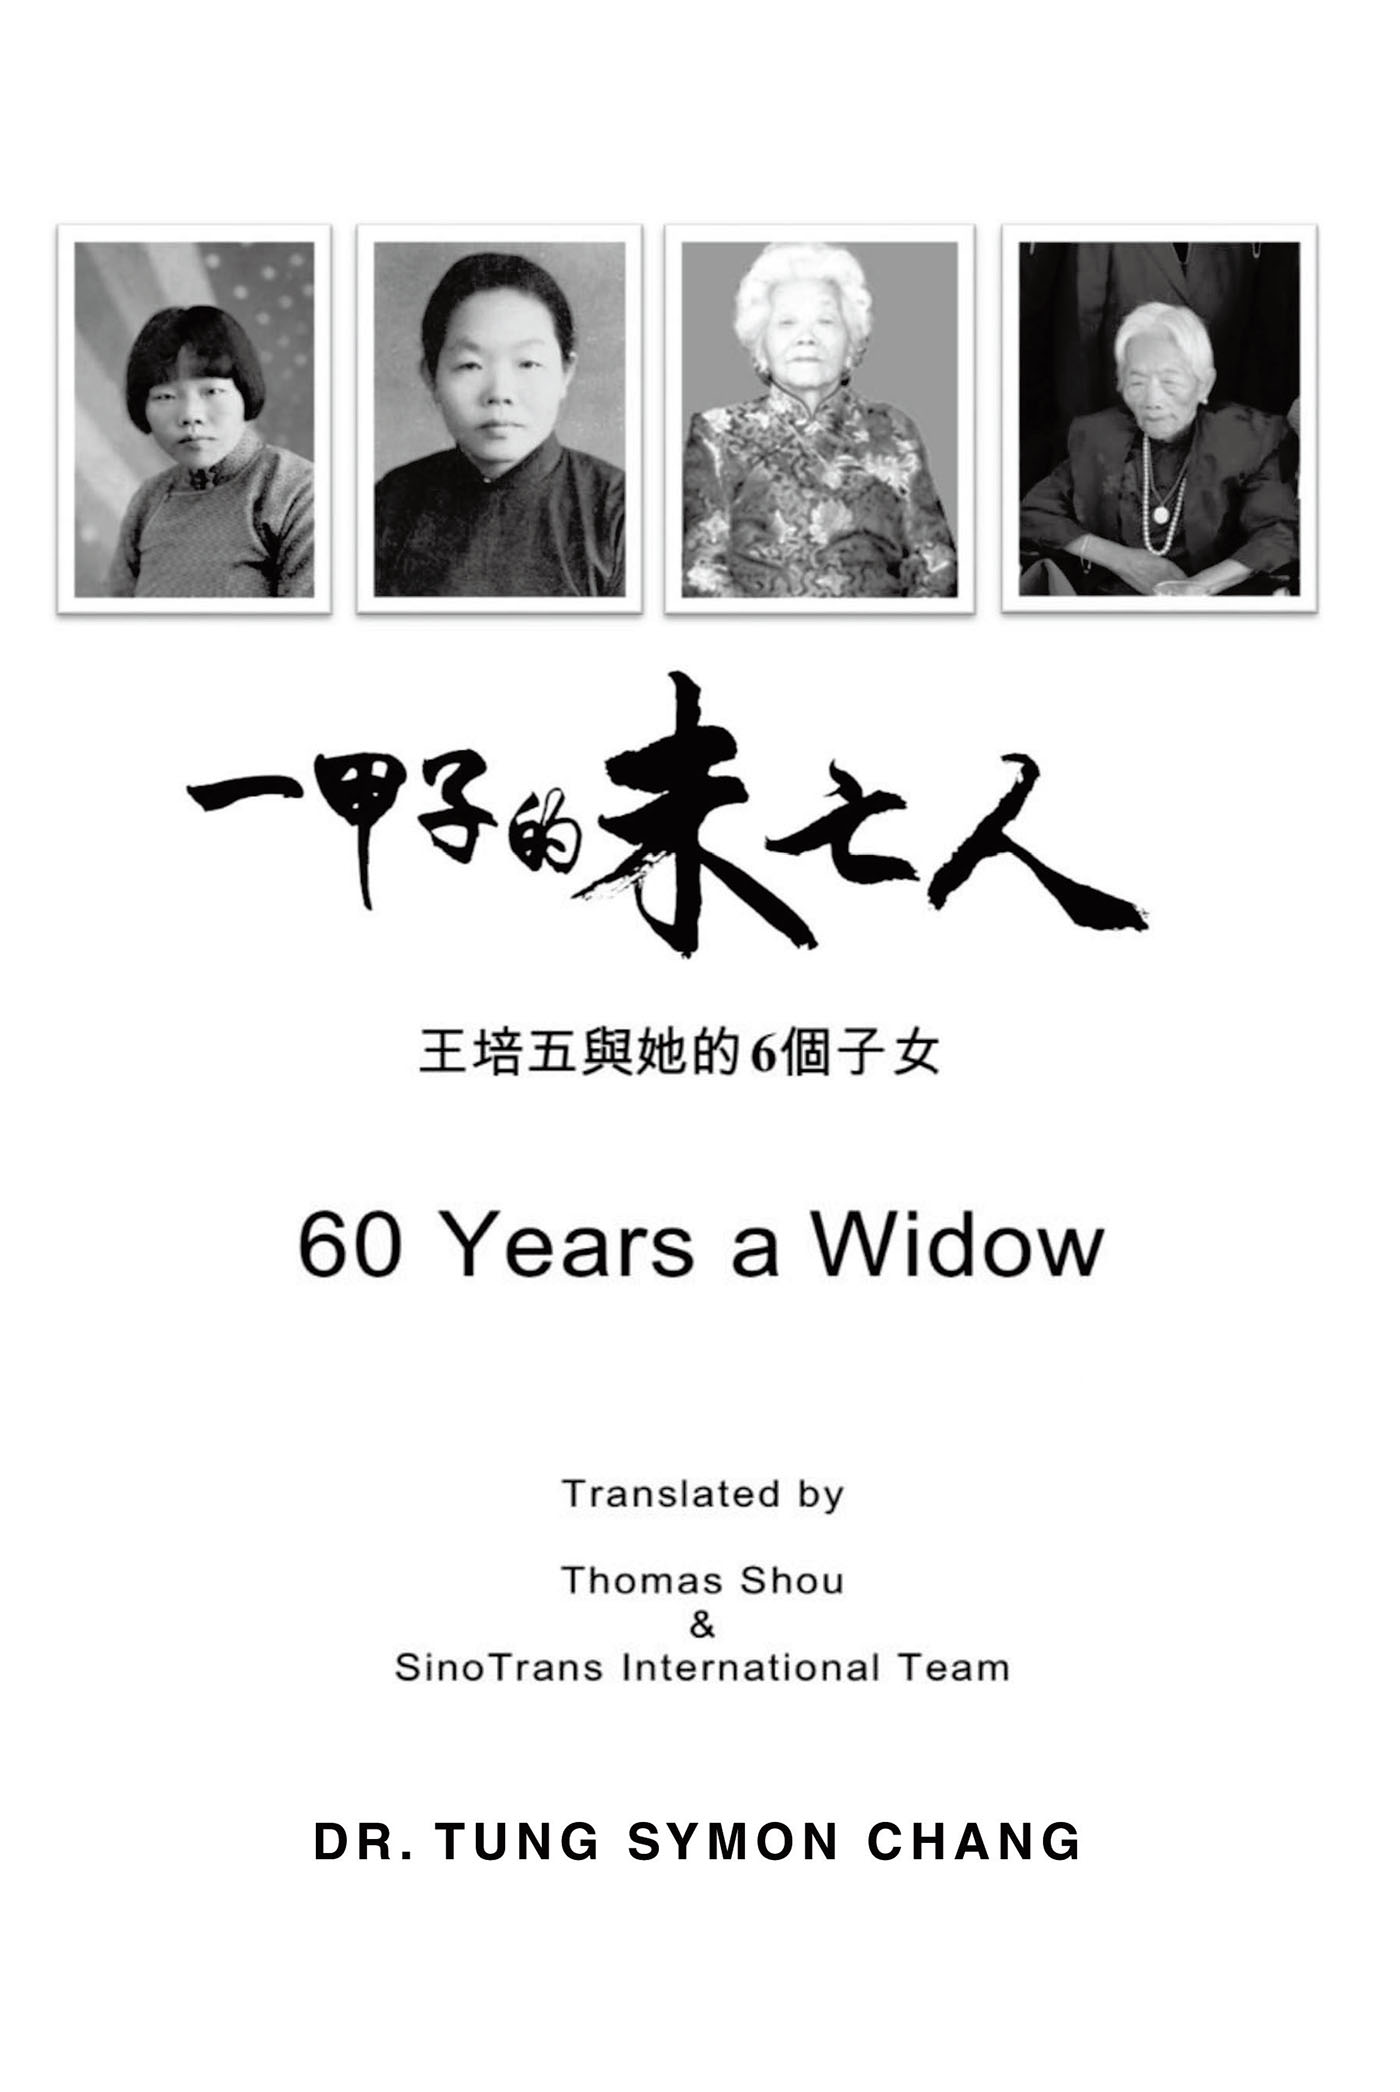 Dr. Tung Symon Chang’s Newly Released "60 Years a Widow" is a Powerful Memoir That Tells a Story of Sheer Determination and Faith